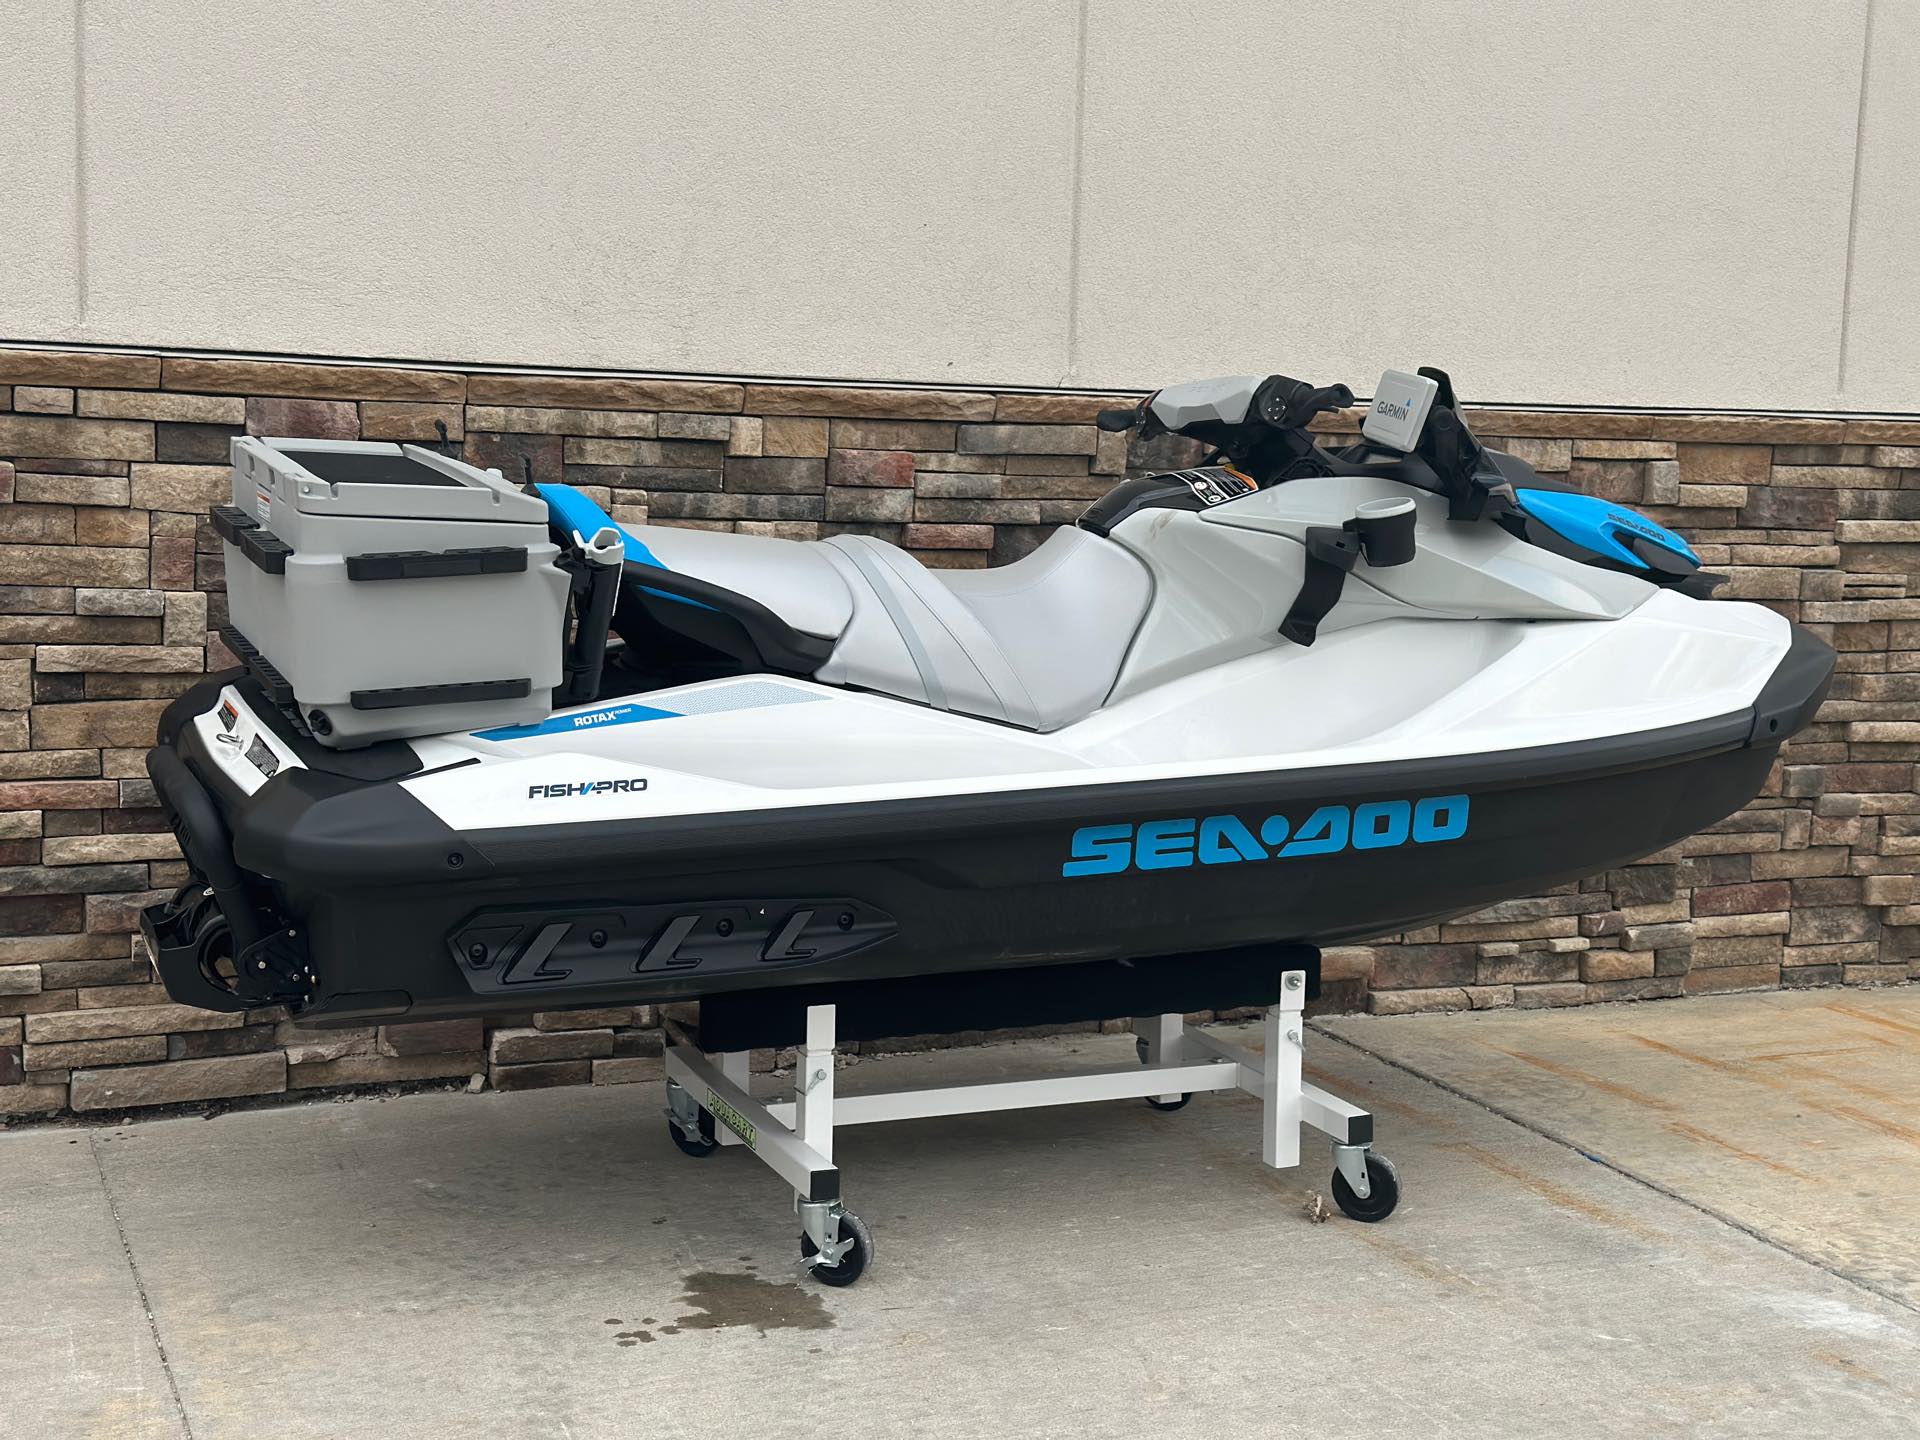 2022 Sea-Doo FISH PRO Scout 130 at Head Indian Motorcycle